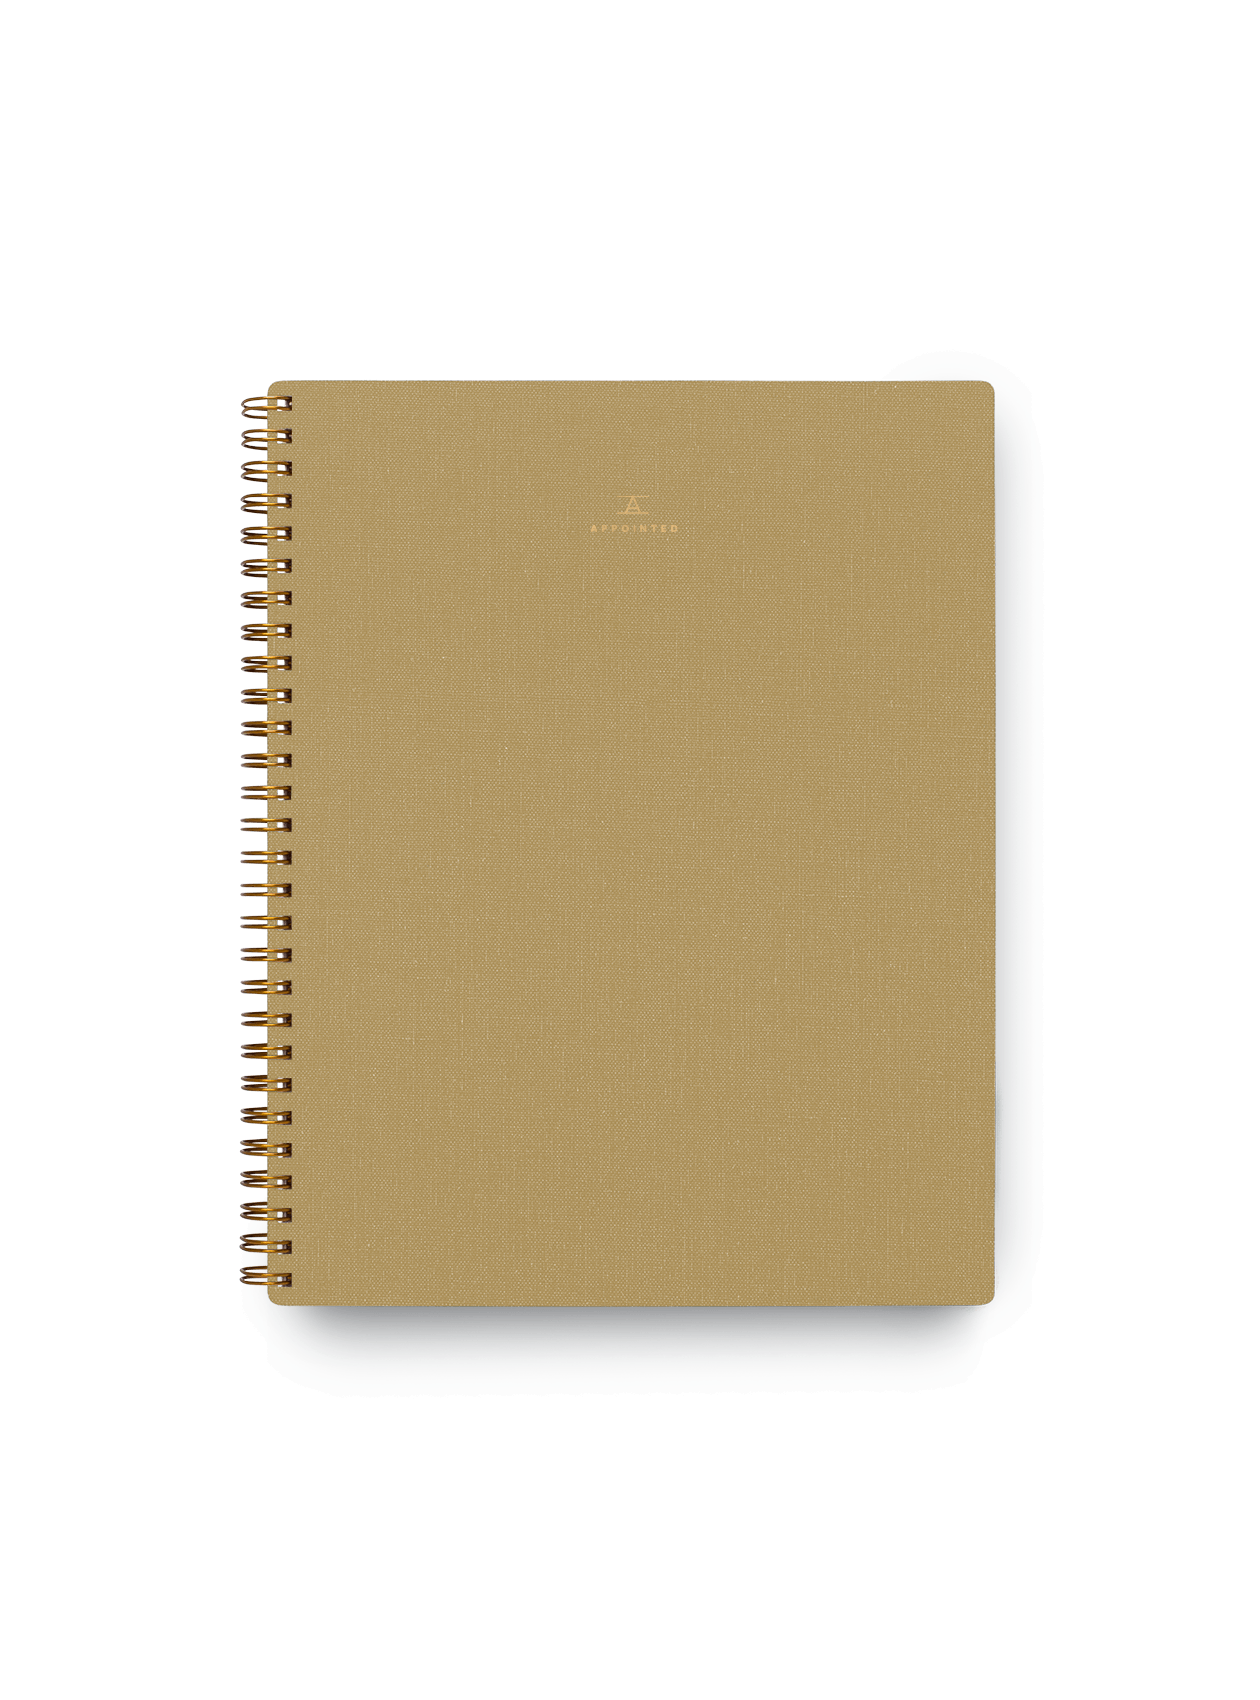 The Appointed Notebook in Dune with bookcloth covers, gold foil stamped details, and wire-o binding || Dune